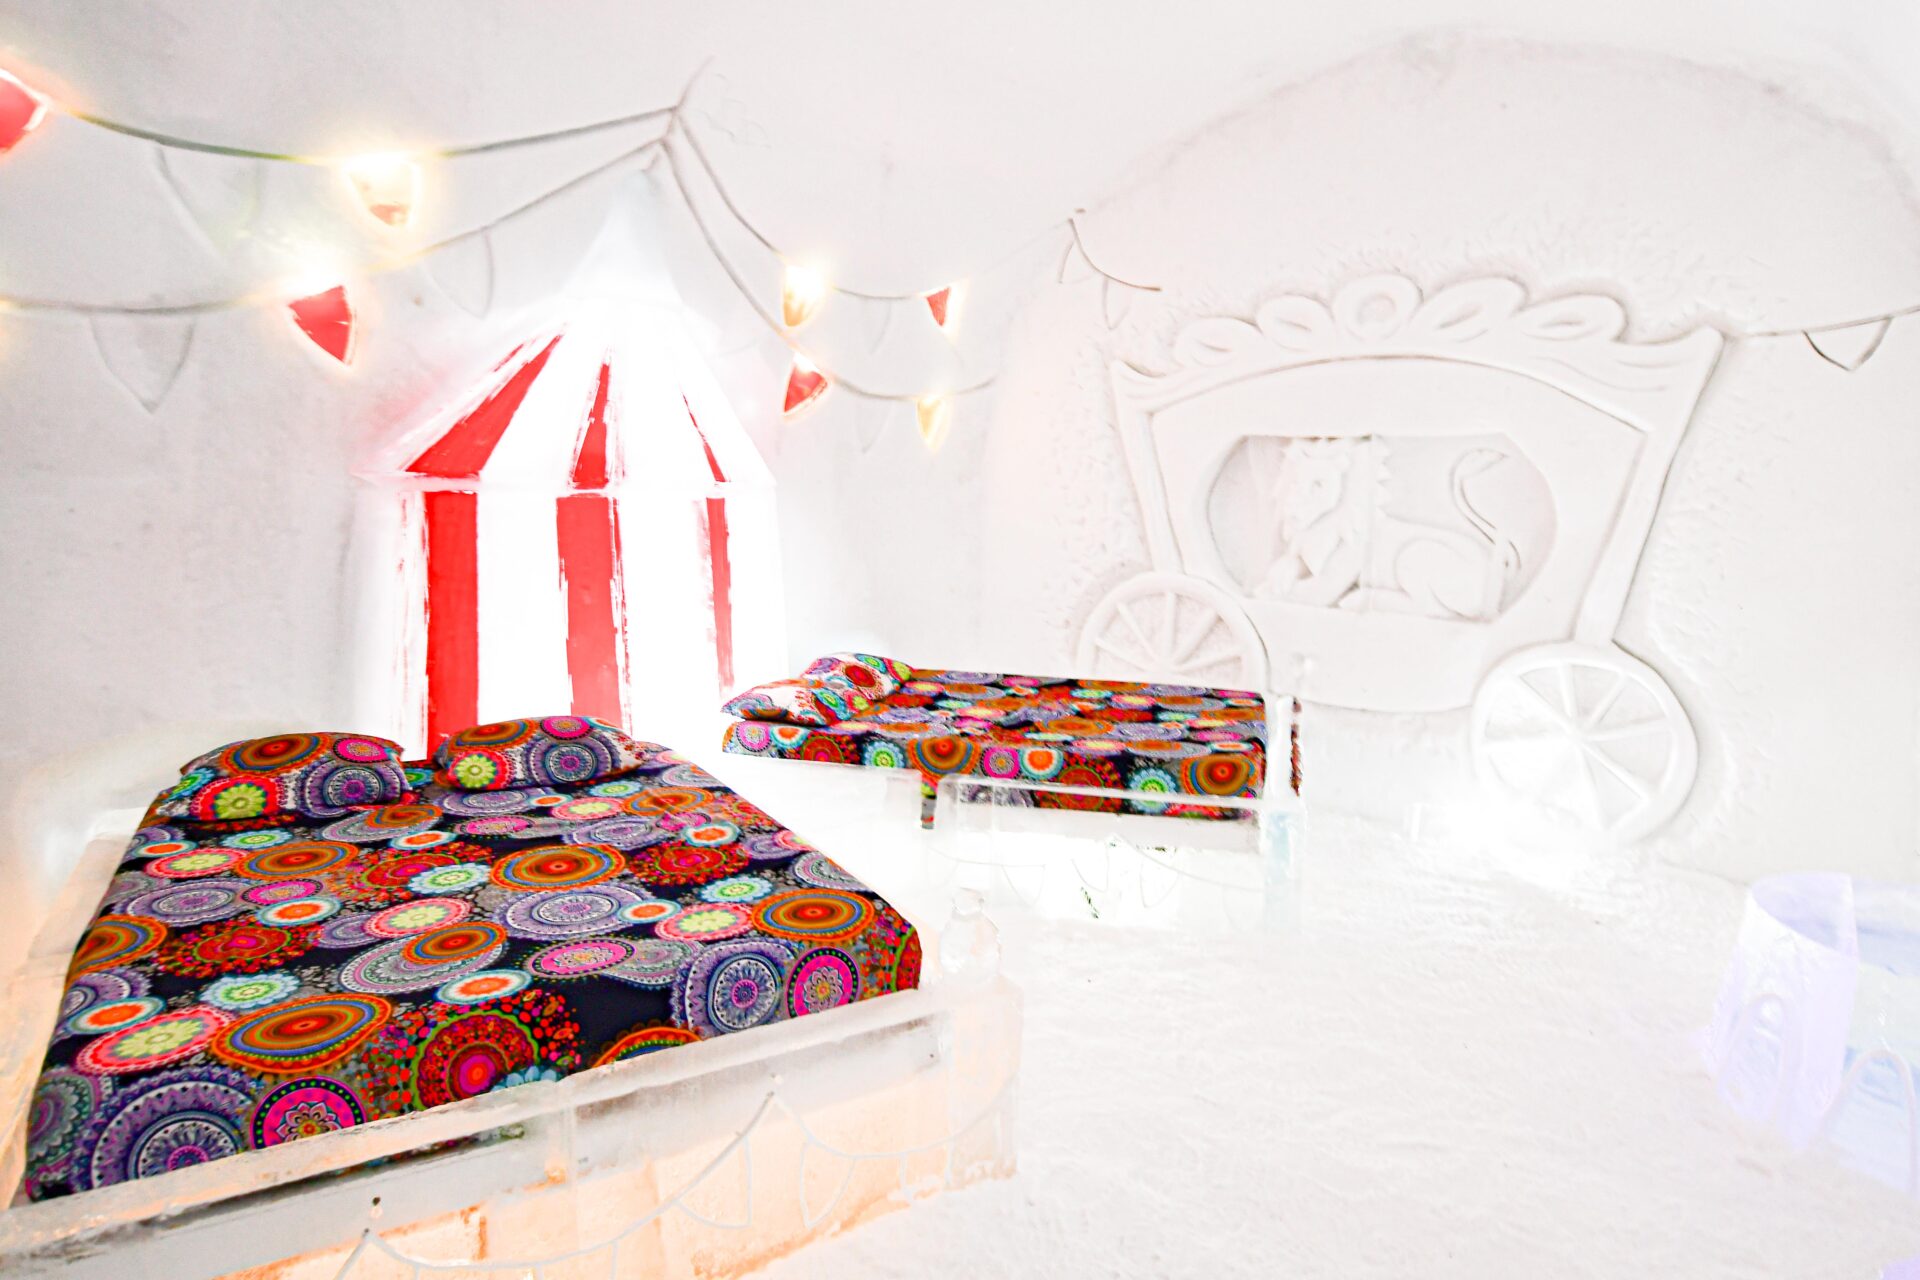 a circus themed room at Hôtel de Glace with 2 beds